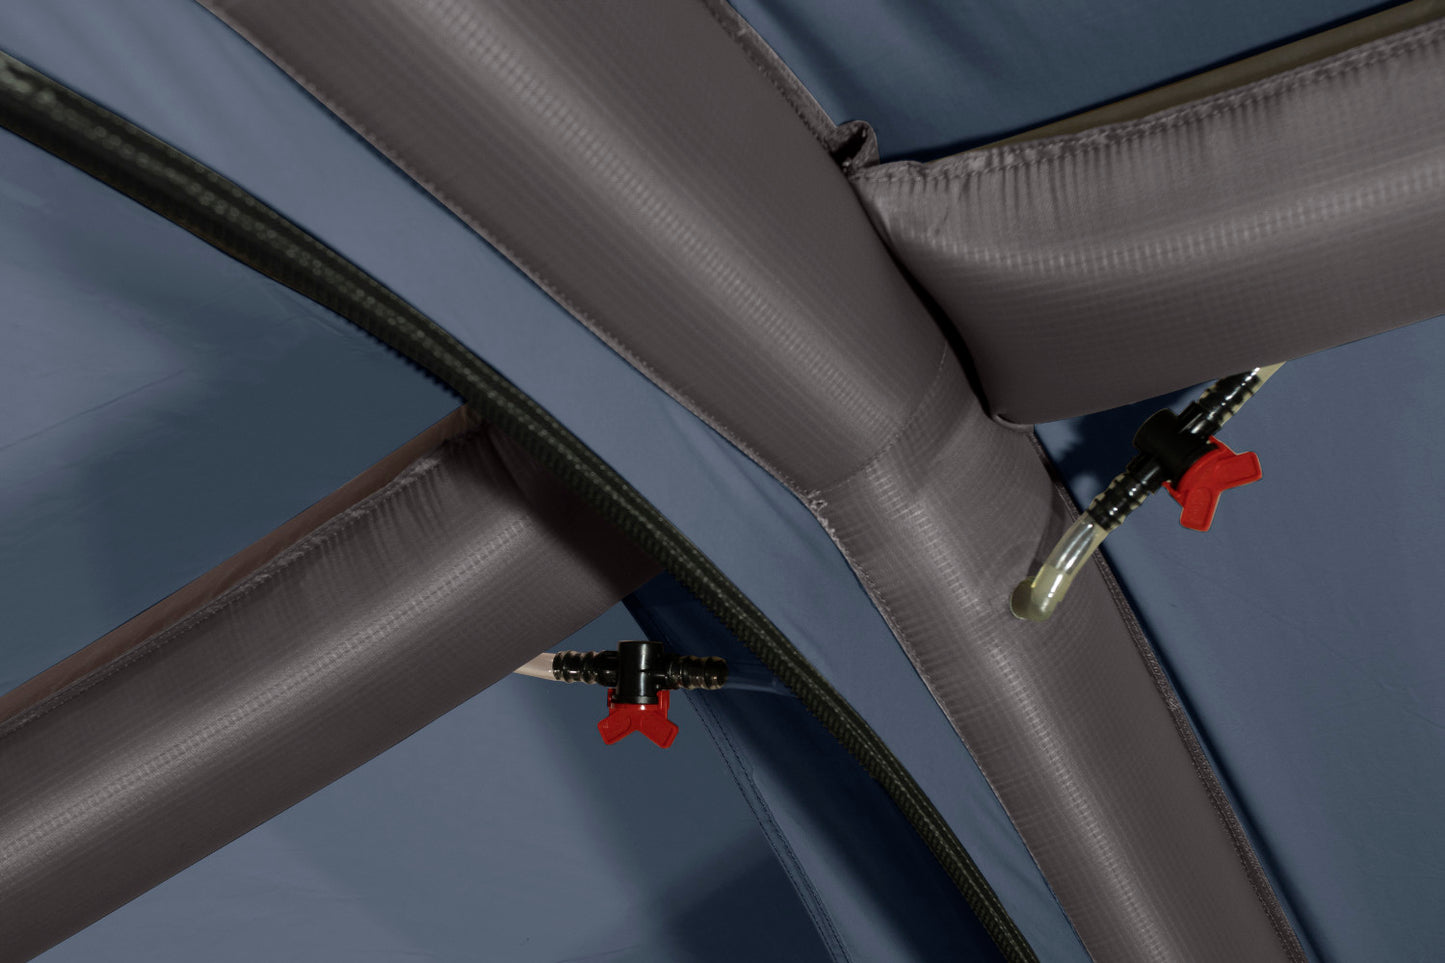 Close up view of the interior air valves attached to the inflatable tent frame